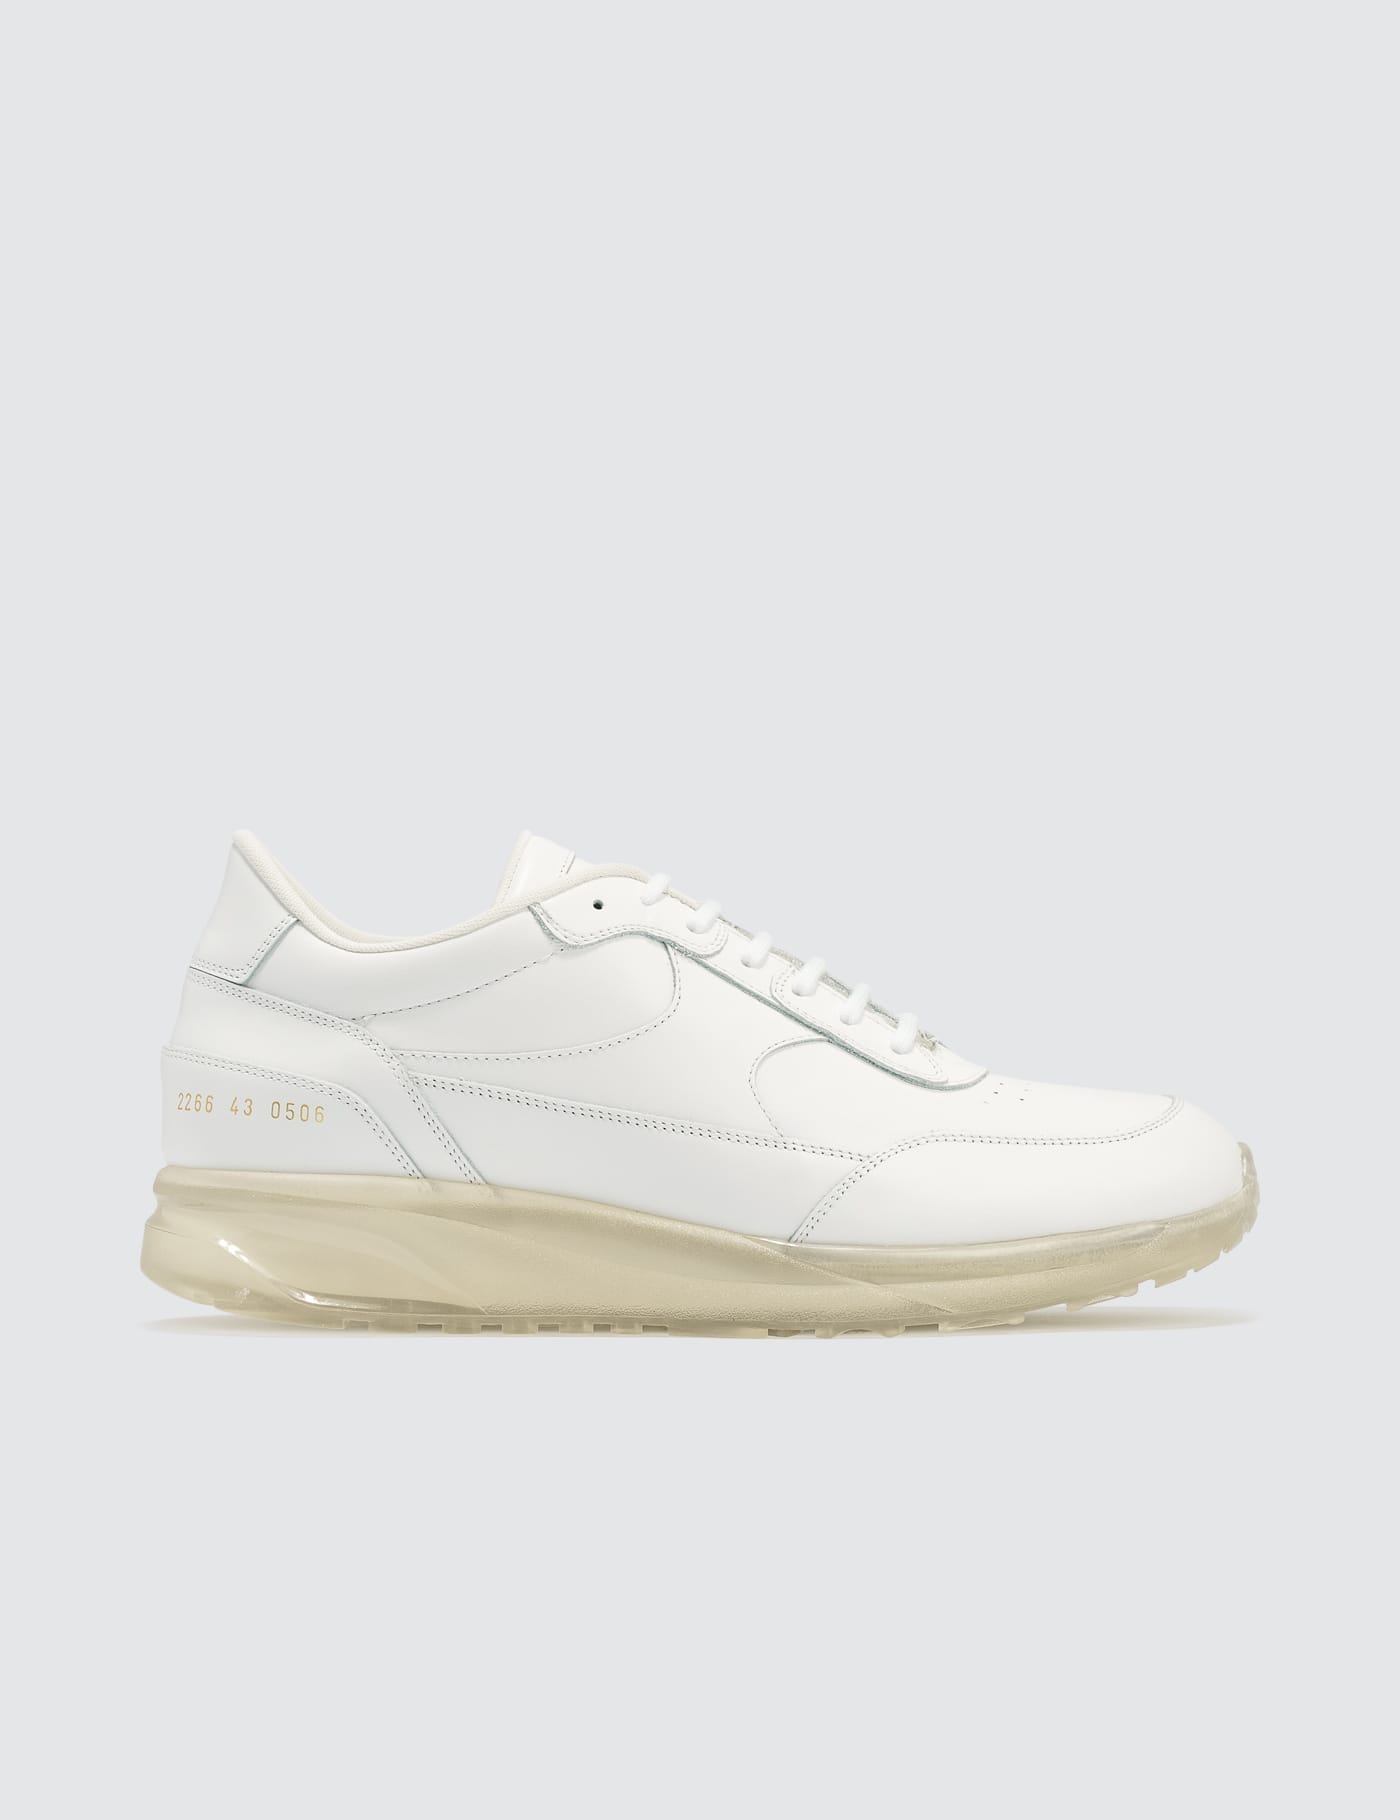 Common Projects - Transparent Sole Pack 